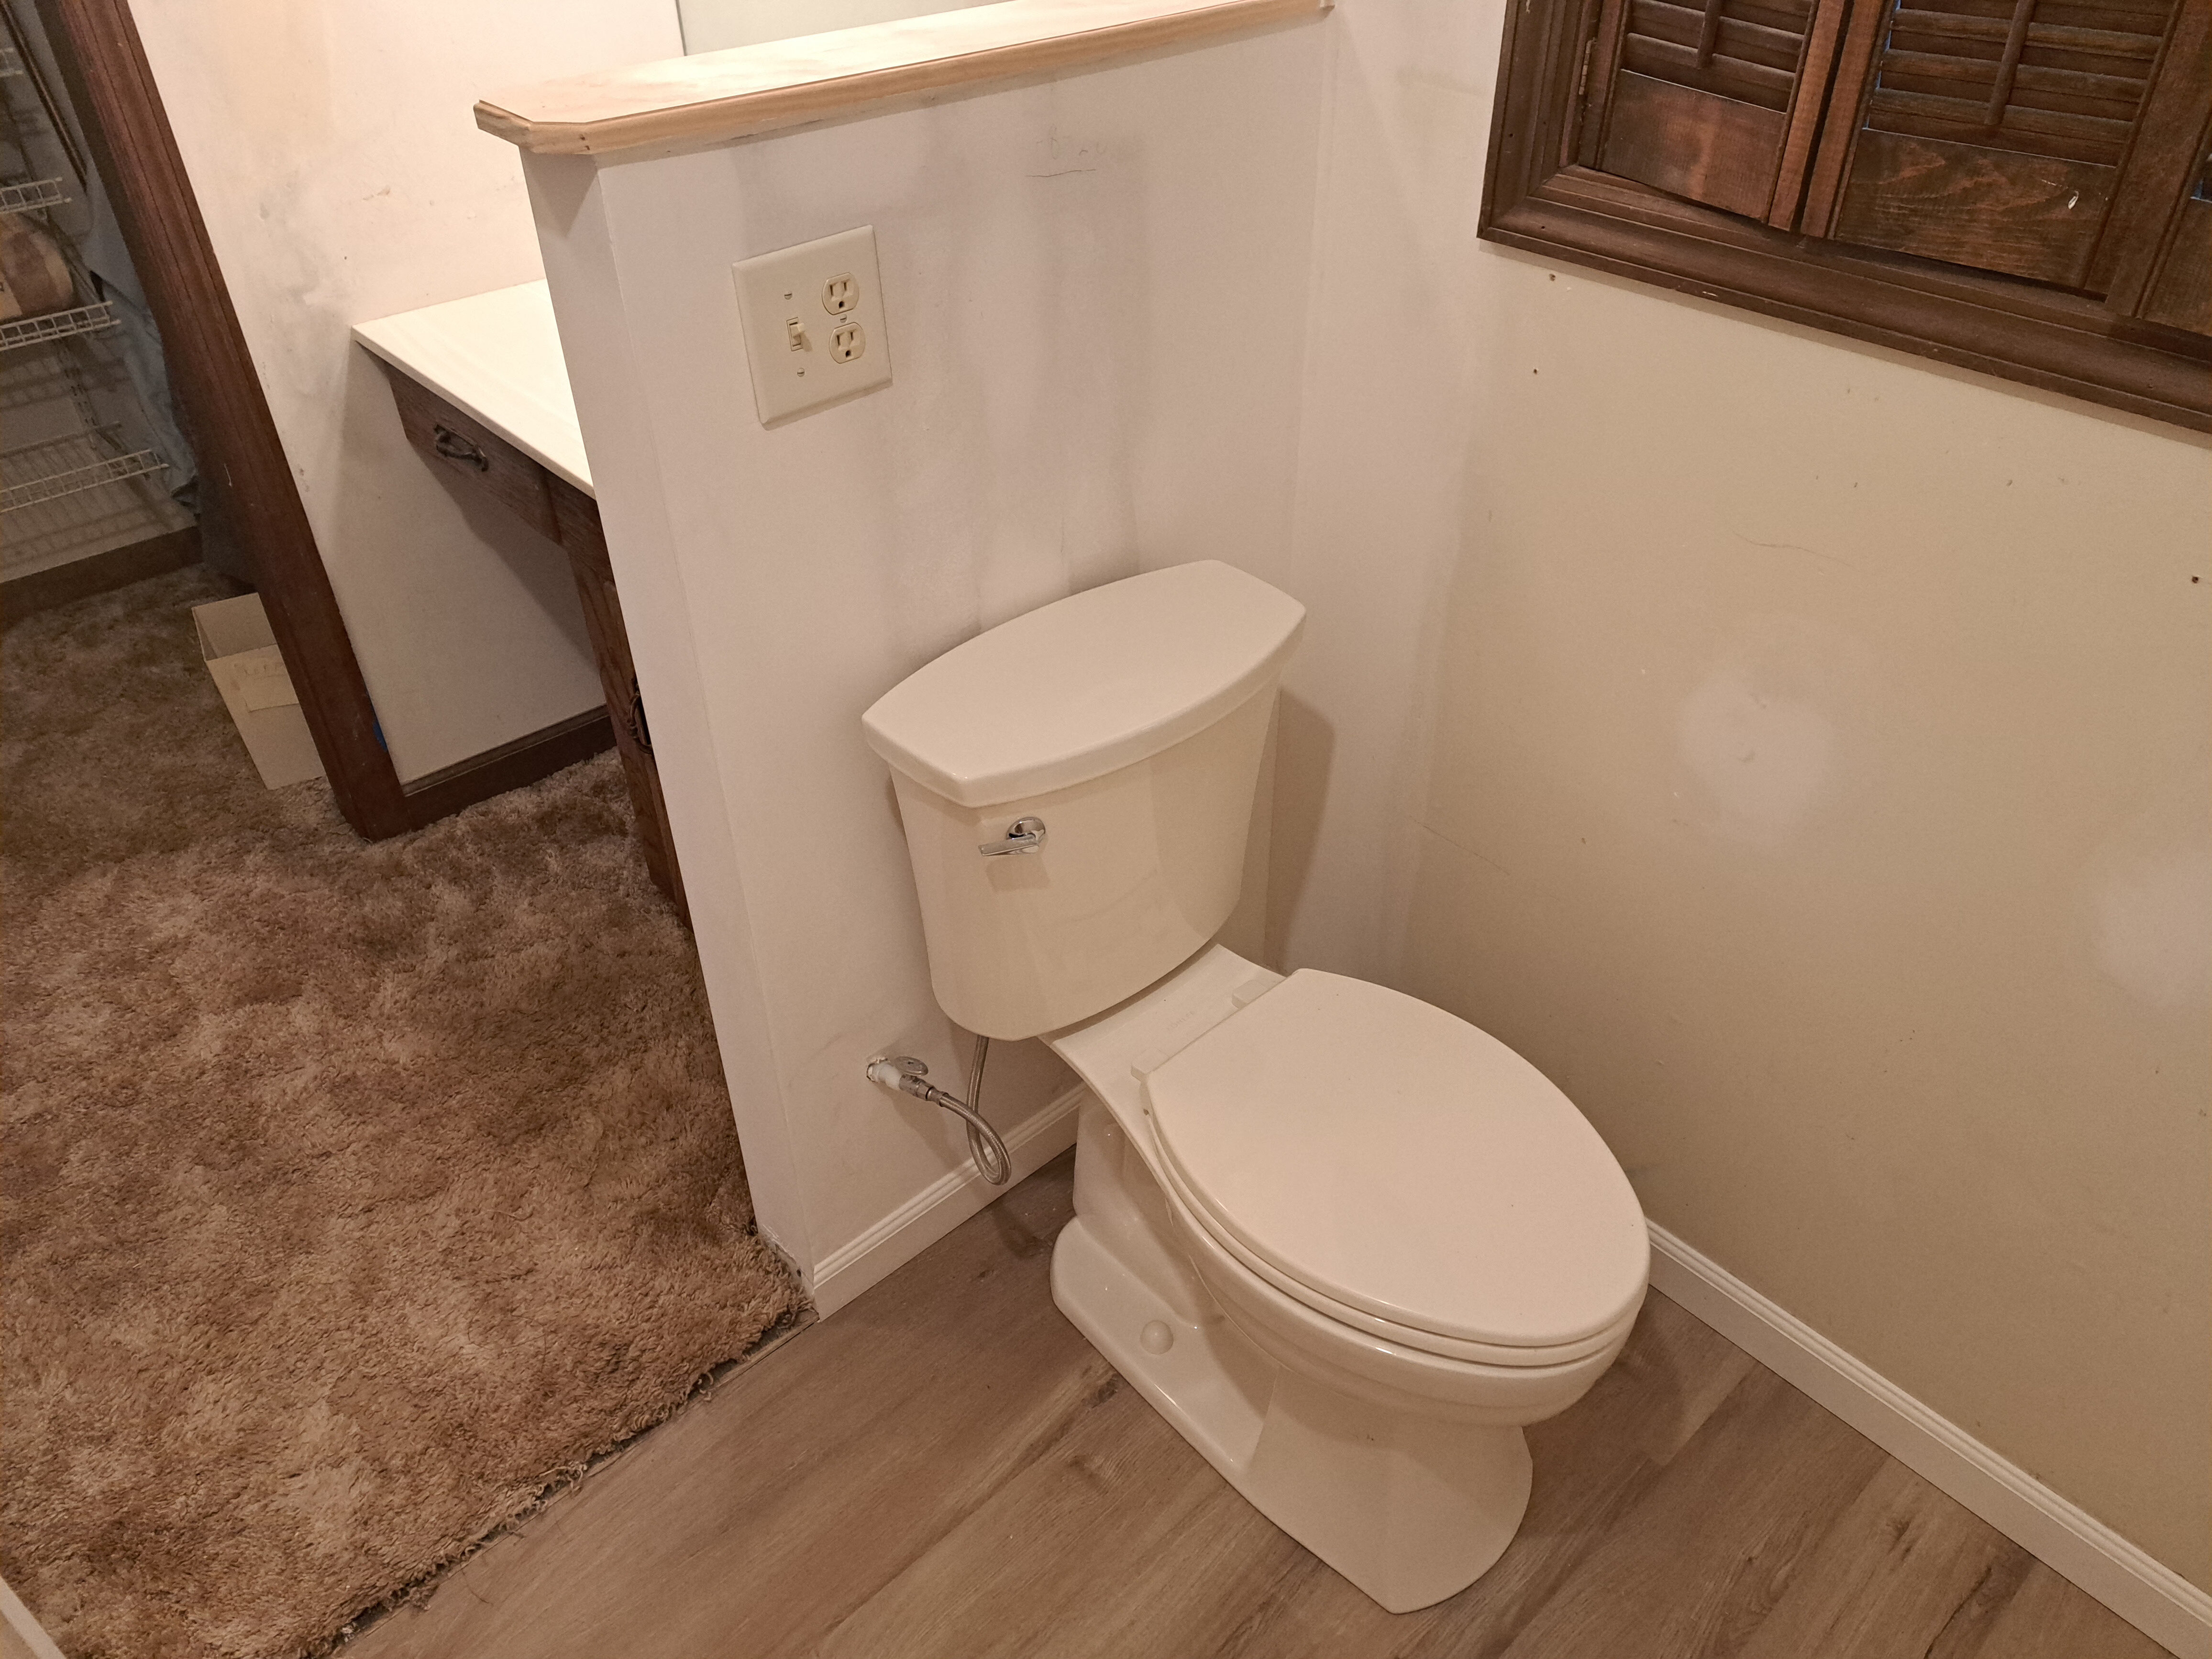 New toilet and flooring